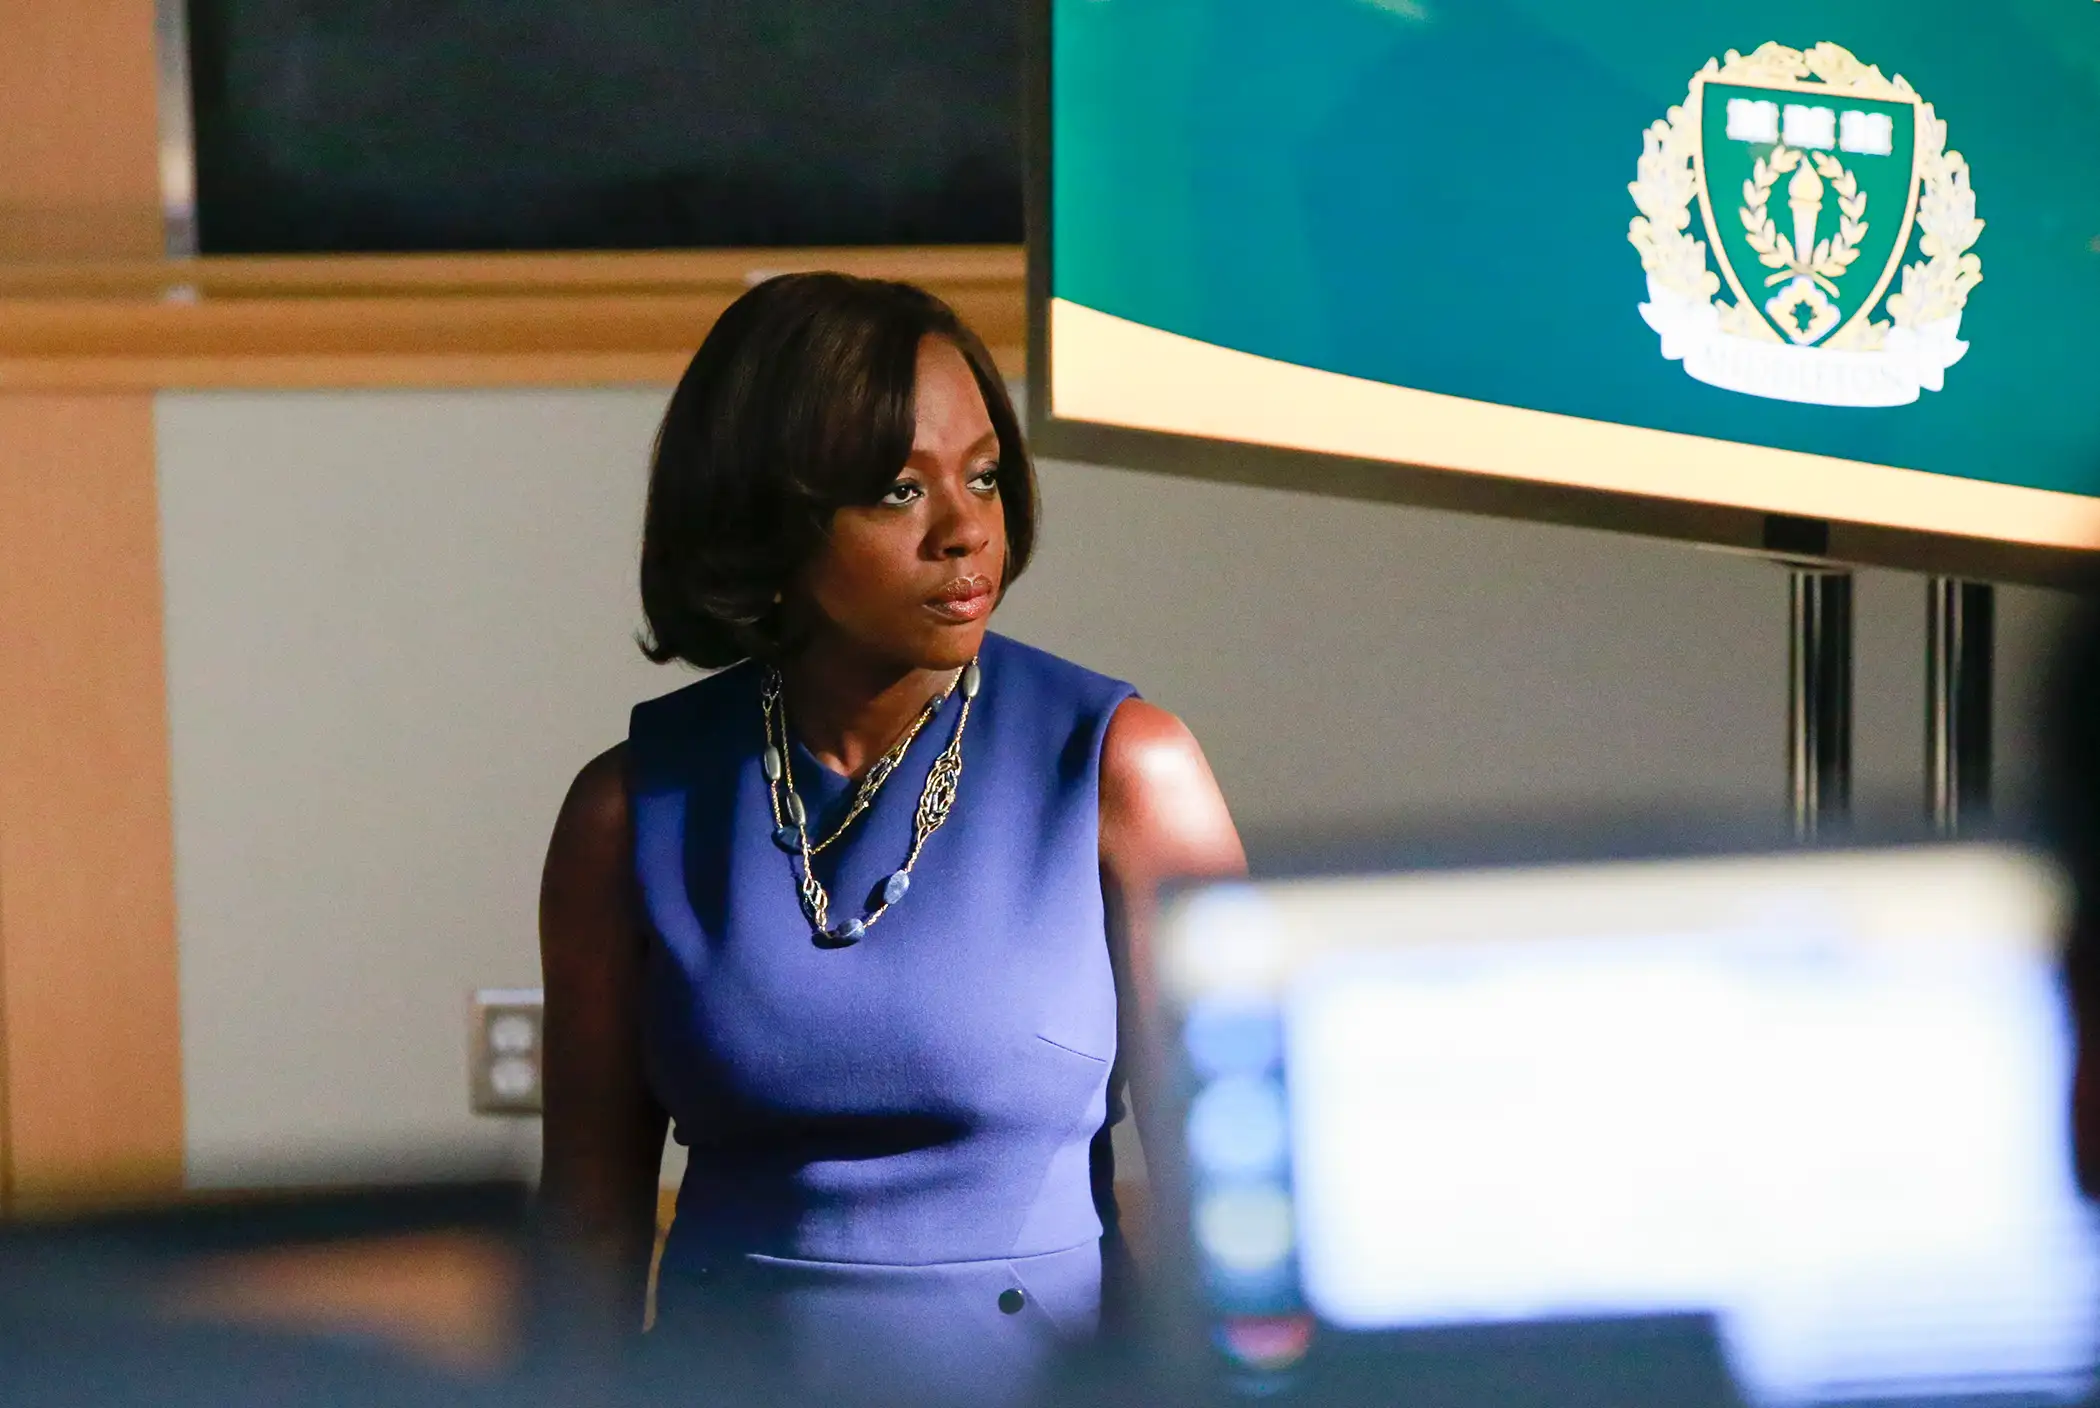 Viola Davis as Annalise Keating in “How To Get Away With Murder” on ABC